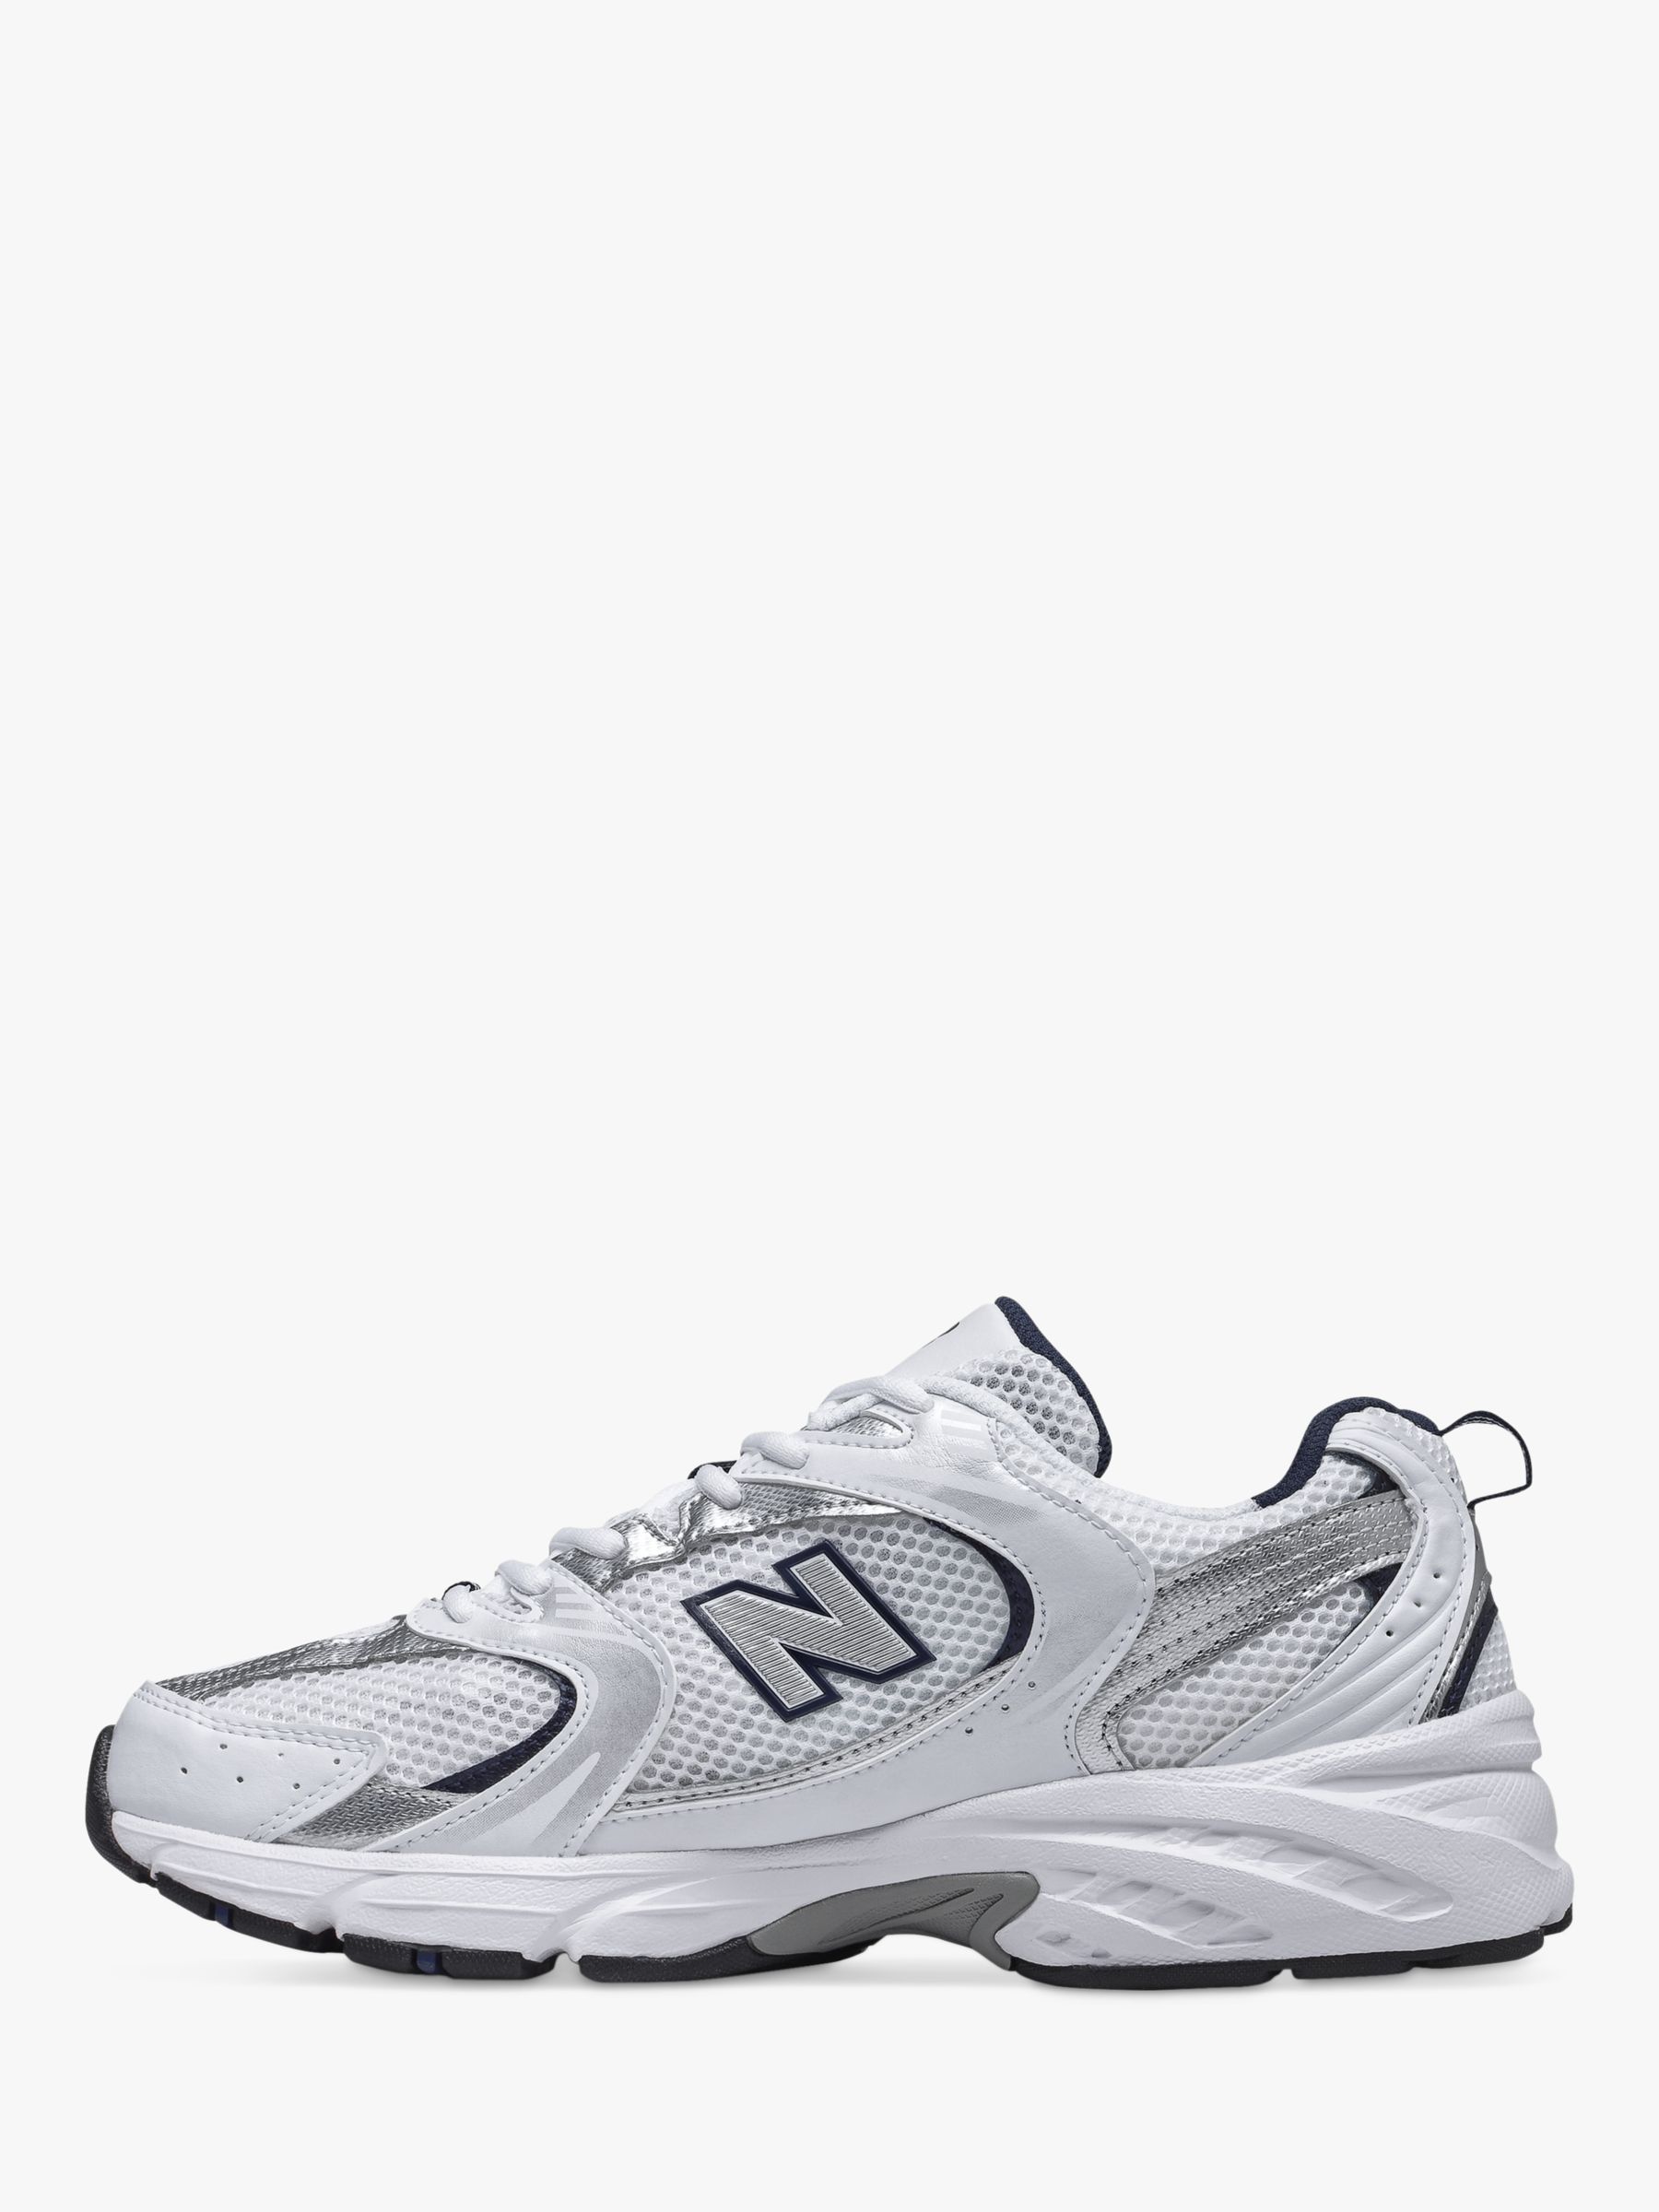 New Balance 530 Lace Up Trainers, White/Navy at John Lewis & Partners